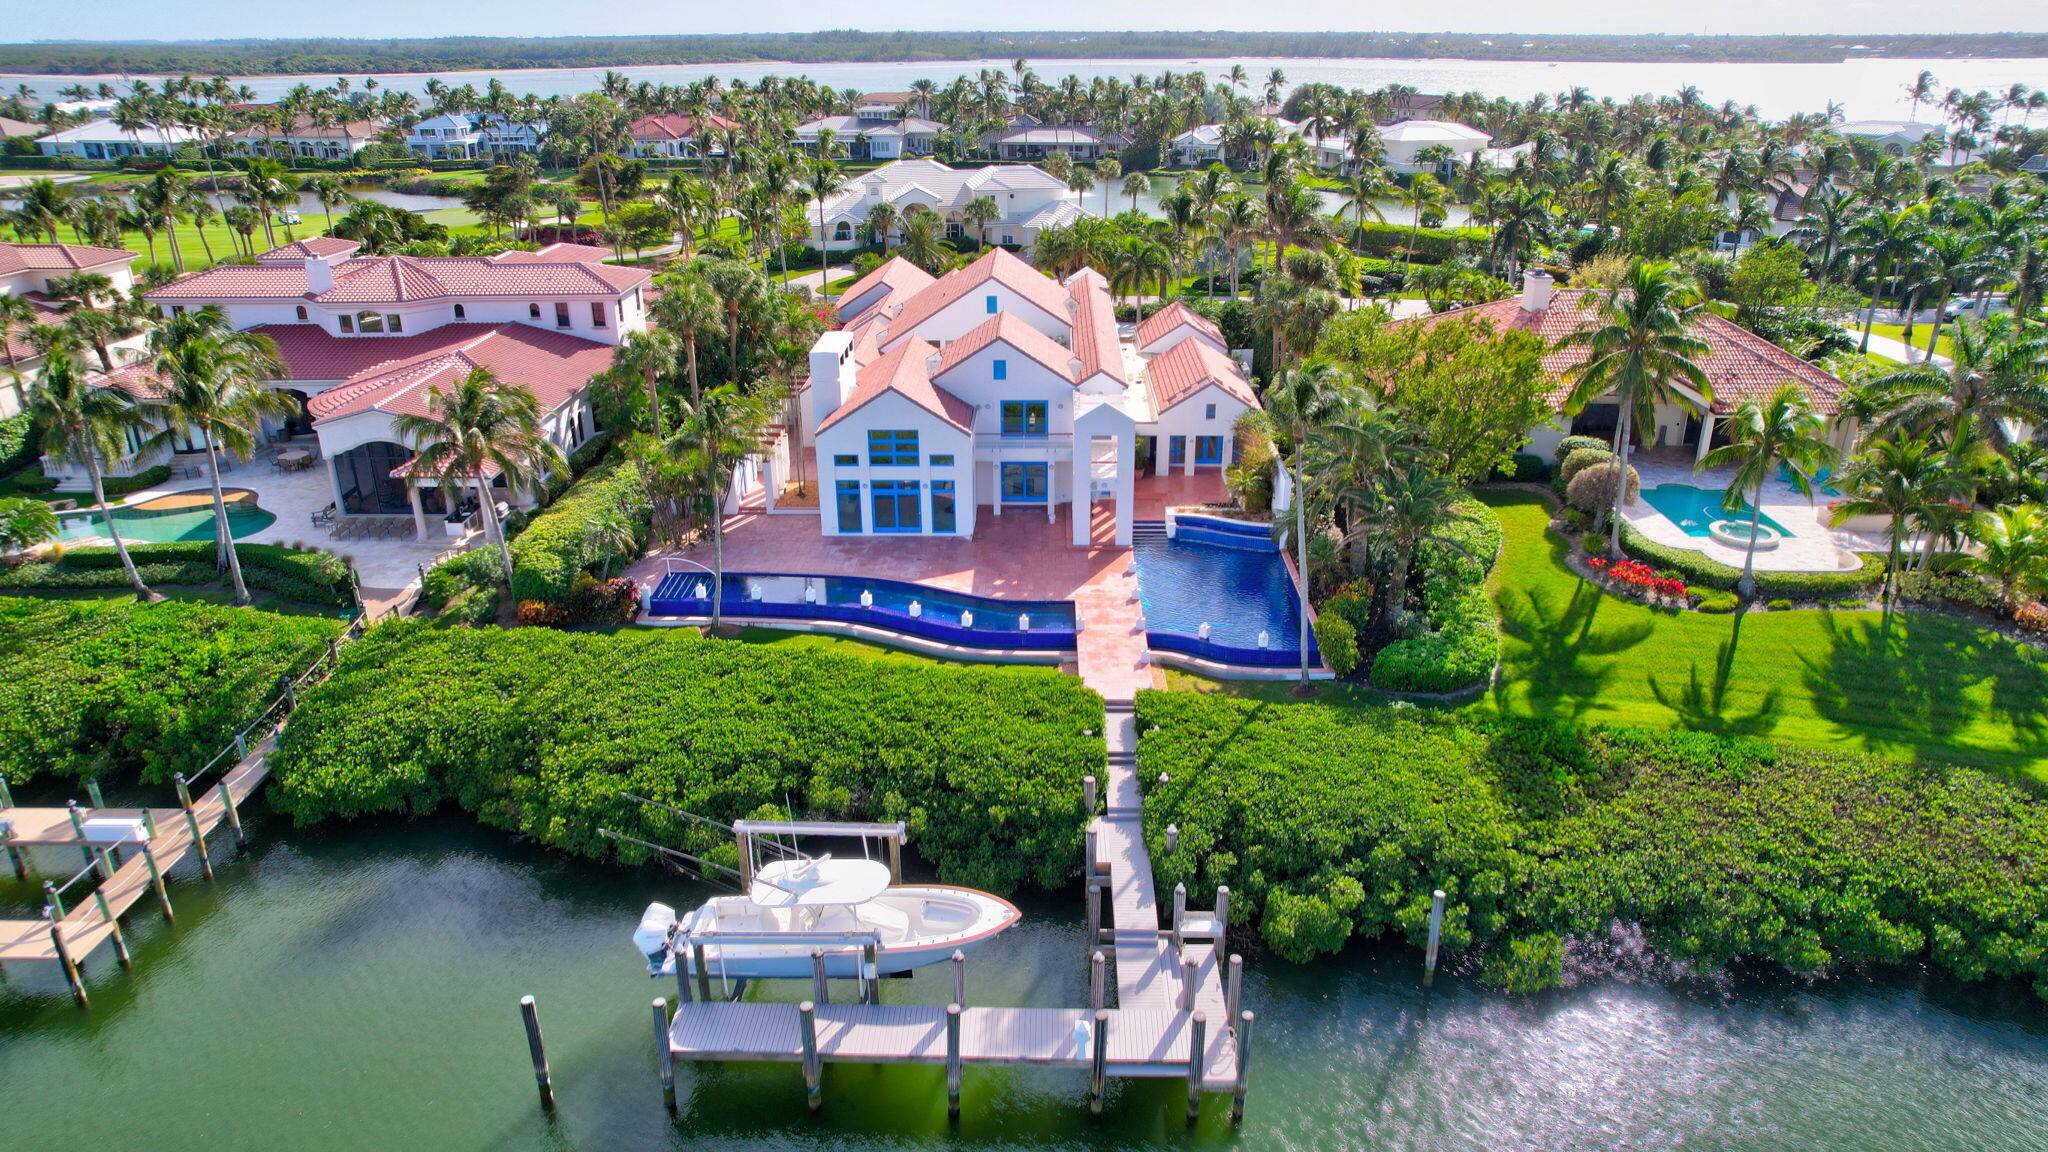 At the intersection of architecture, nature, and water lies this unparalleled estate in the exclusive community of Sailfish Point.